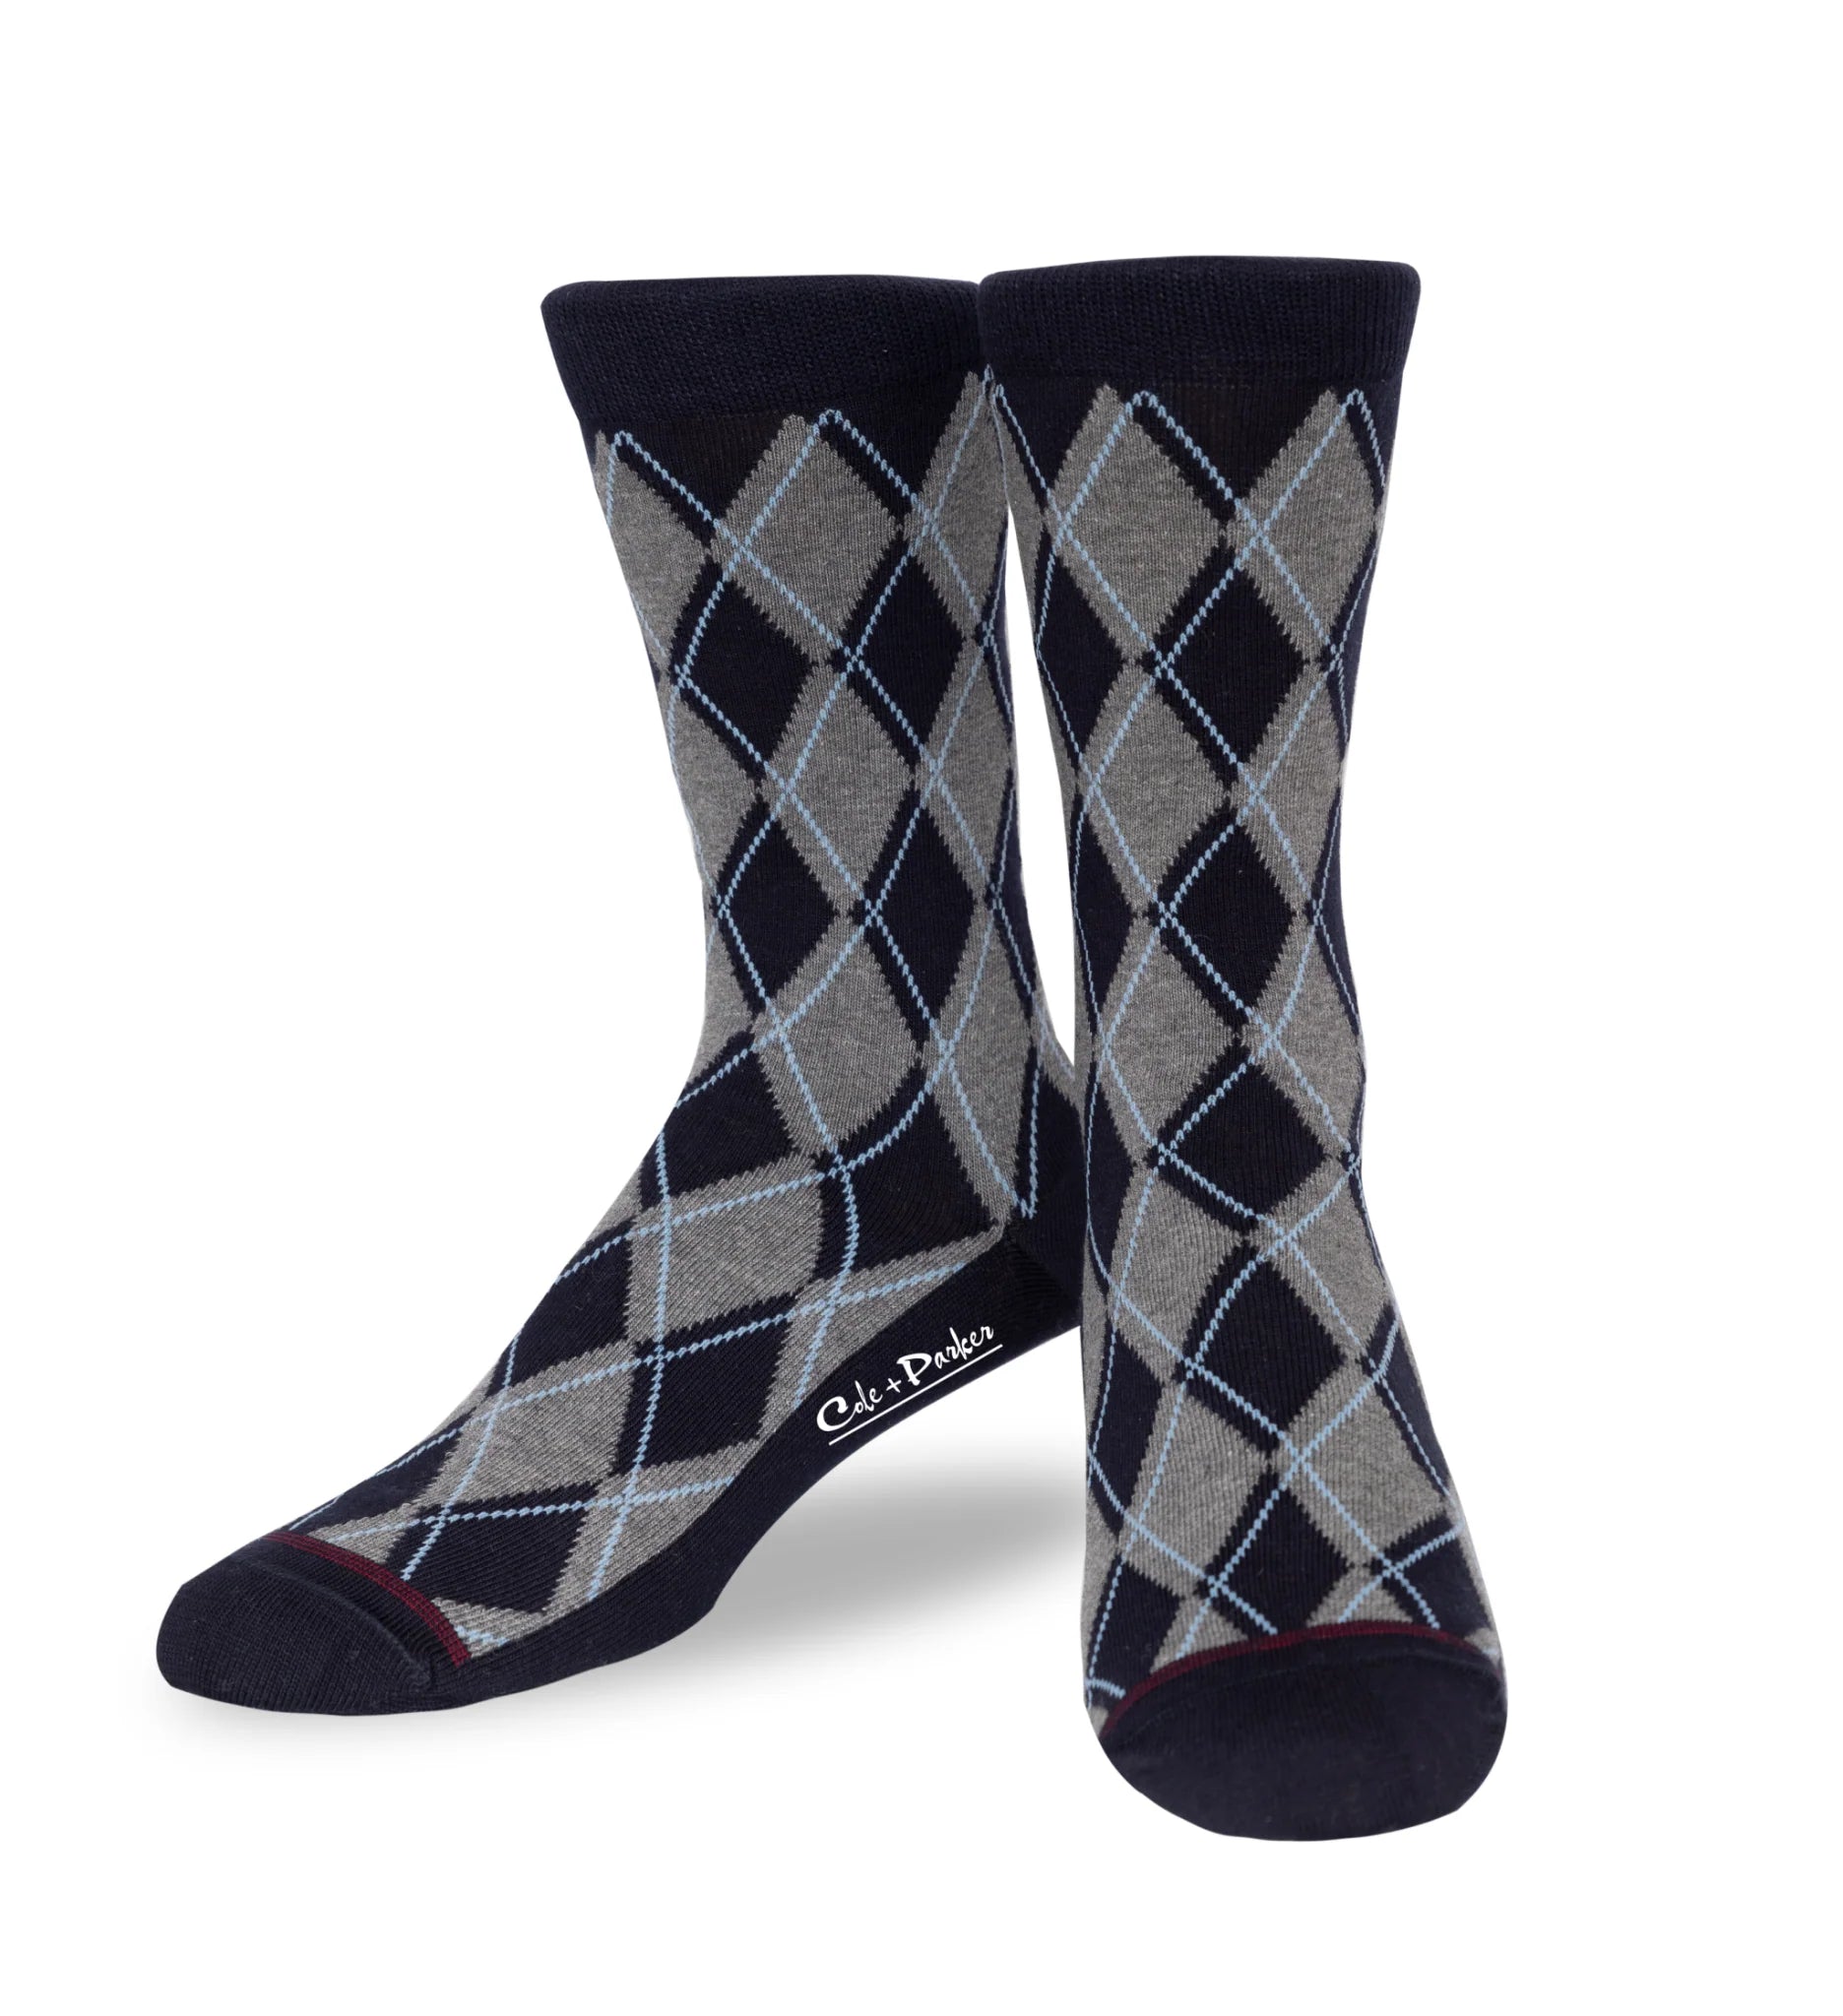 Argyle Socks in Navy Grey color, Shop Spring collection now 